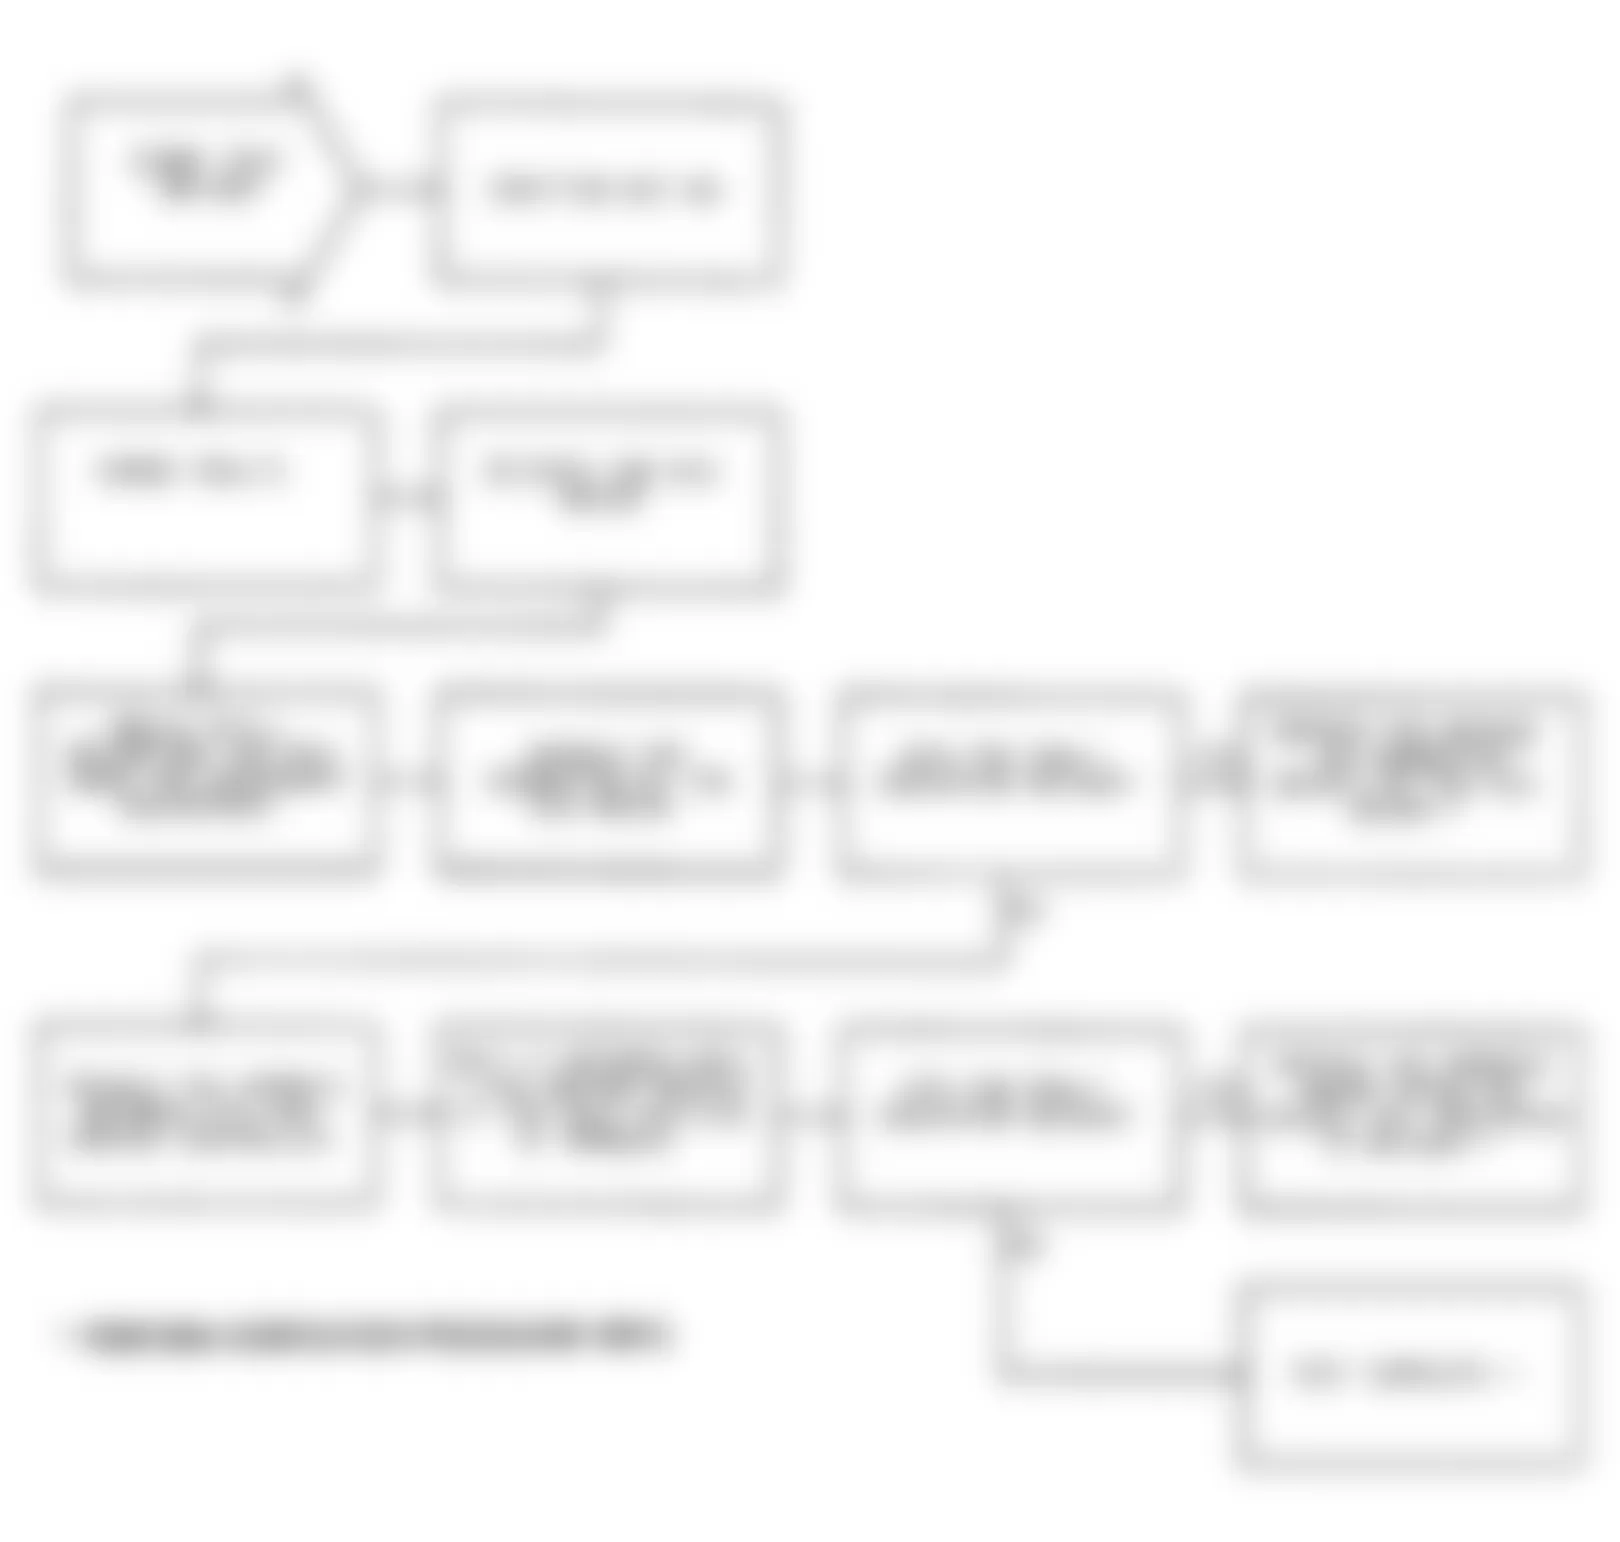 Chrysler Imperial 1991 - Component Locations -  Test DR-48A: Flowchart